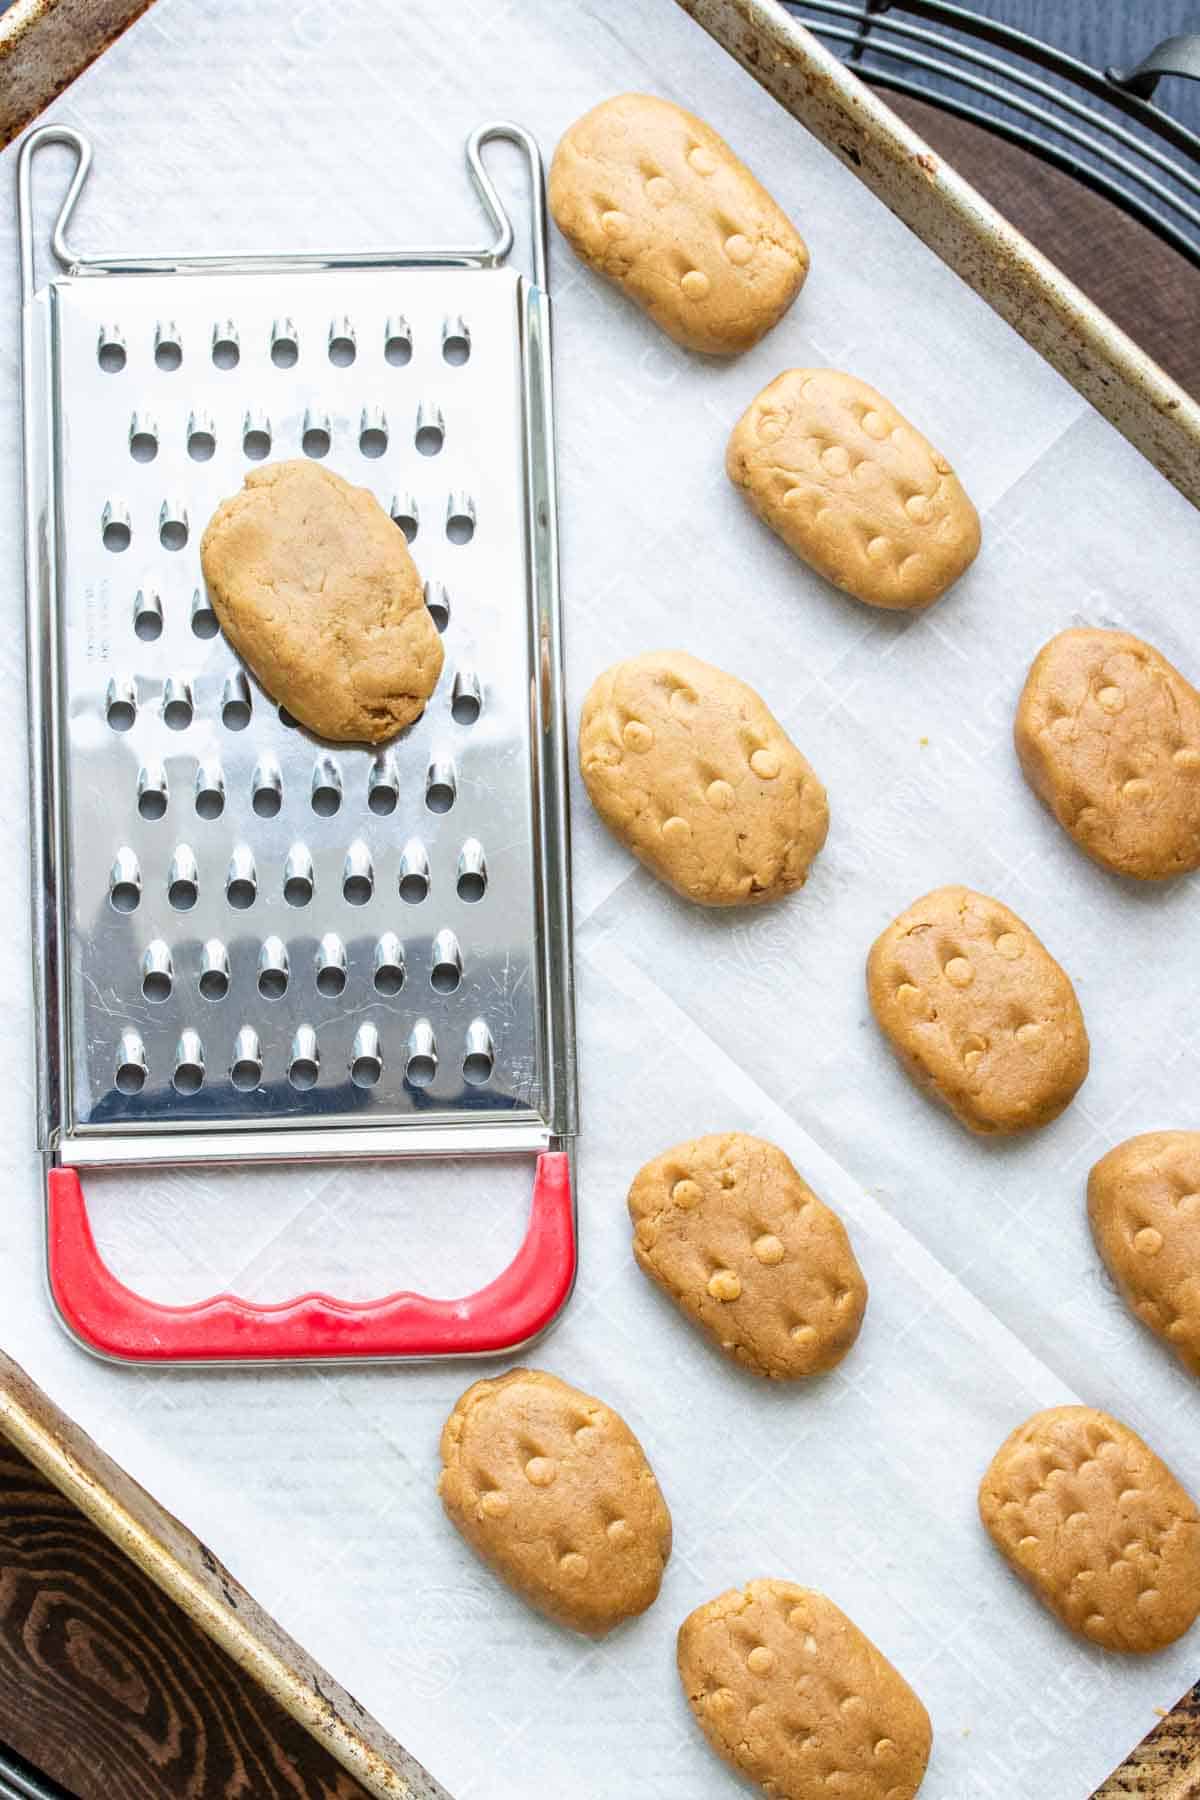 Raw cookies being shaped on a grater and put on a cookie sheet